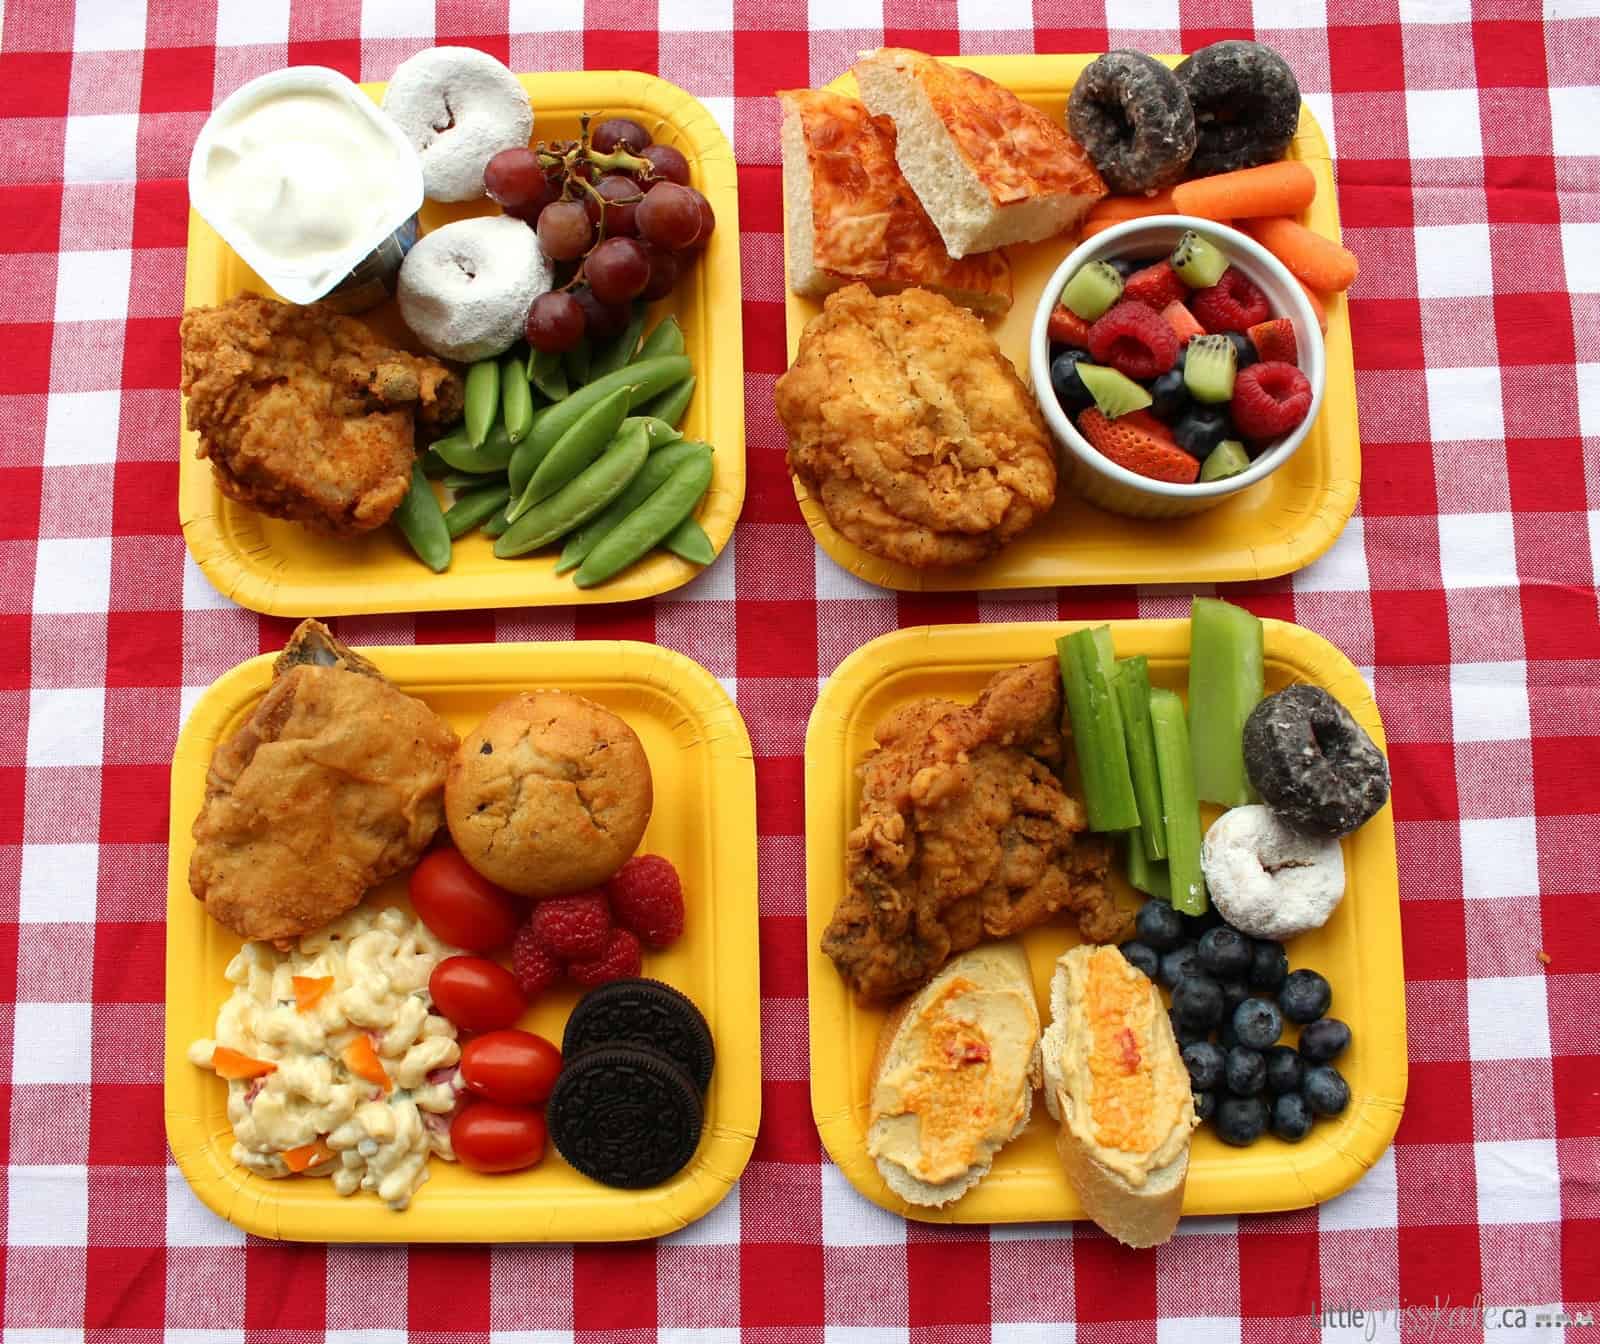 Picnic Lunch  Picnic foods, Picnic food, Party food platters